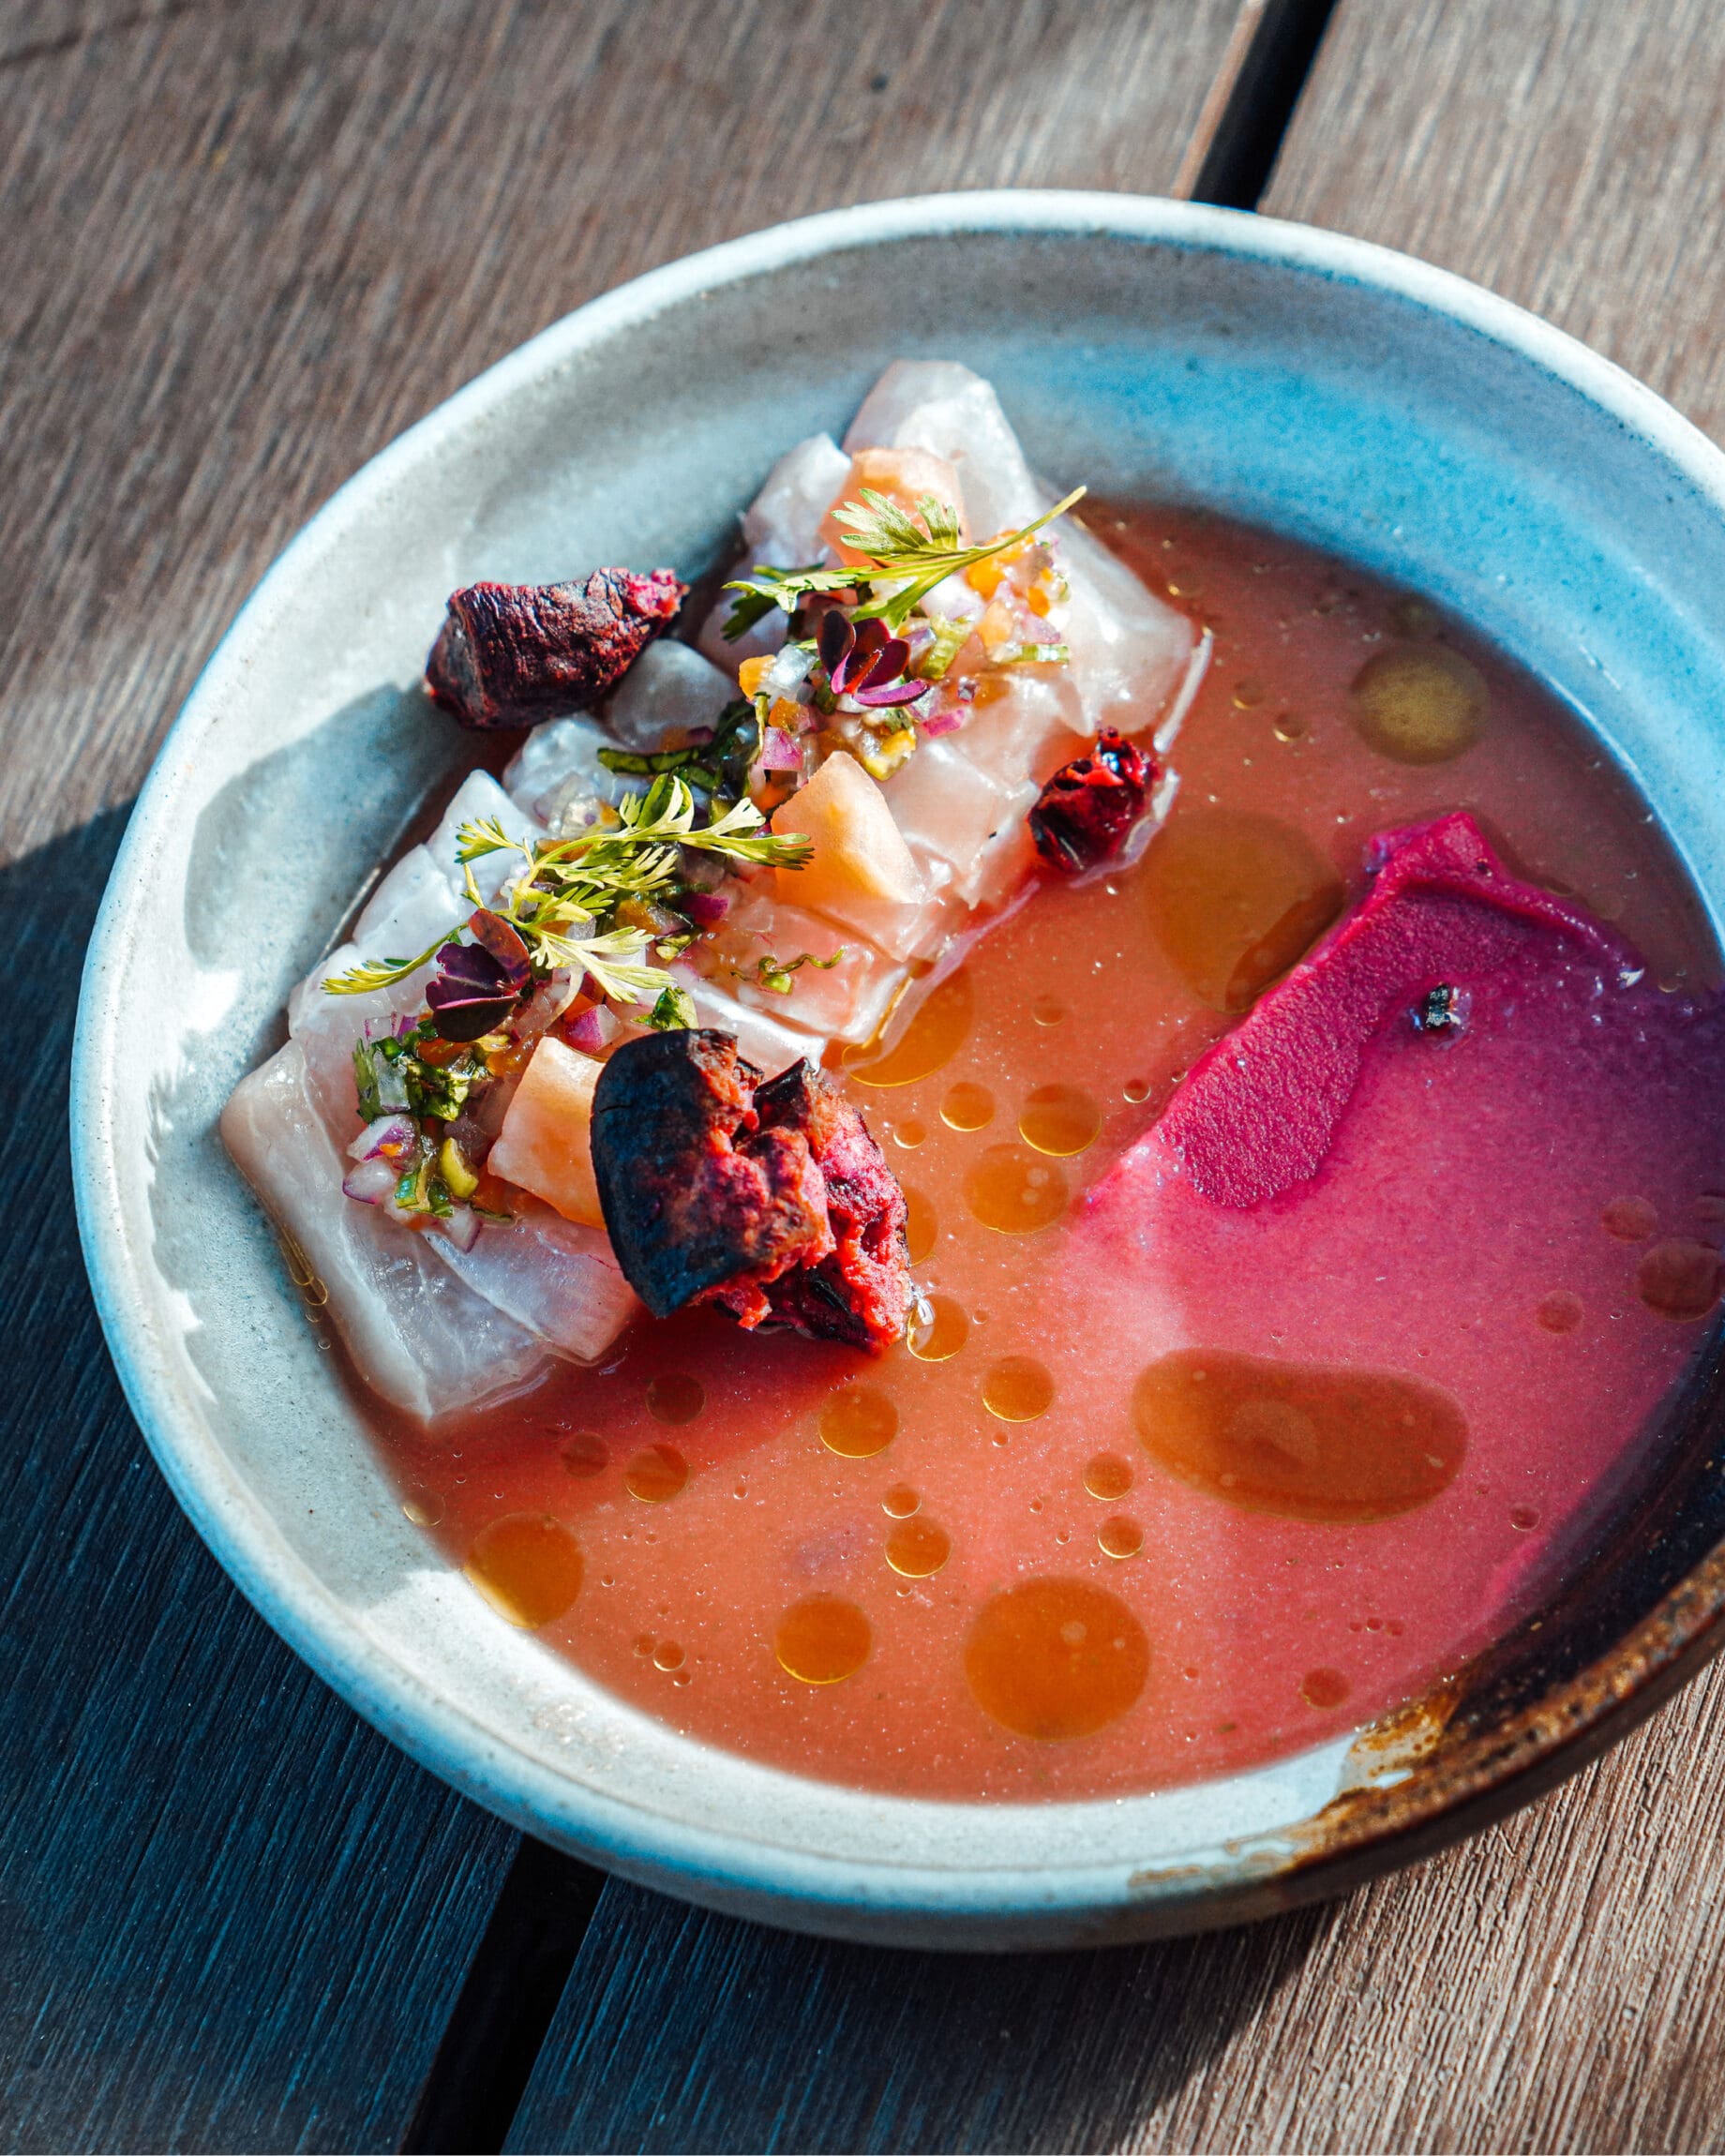 The best restaurants in Mexico City | A colourful squid dish at Esquina Comun